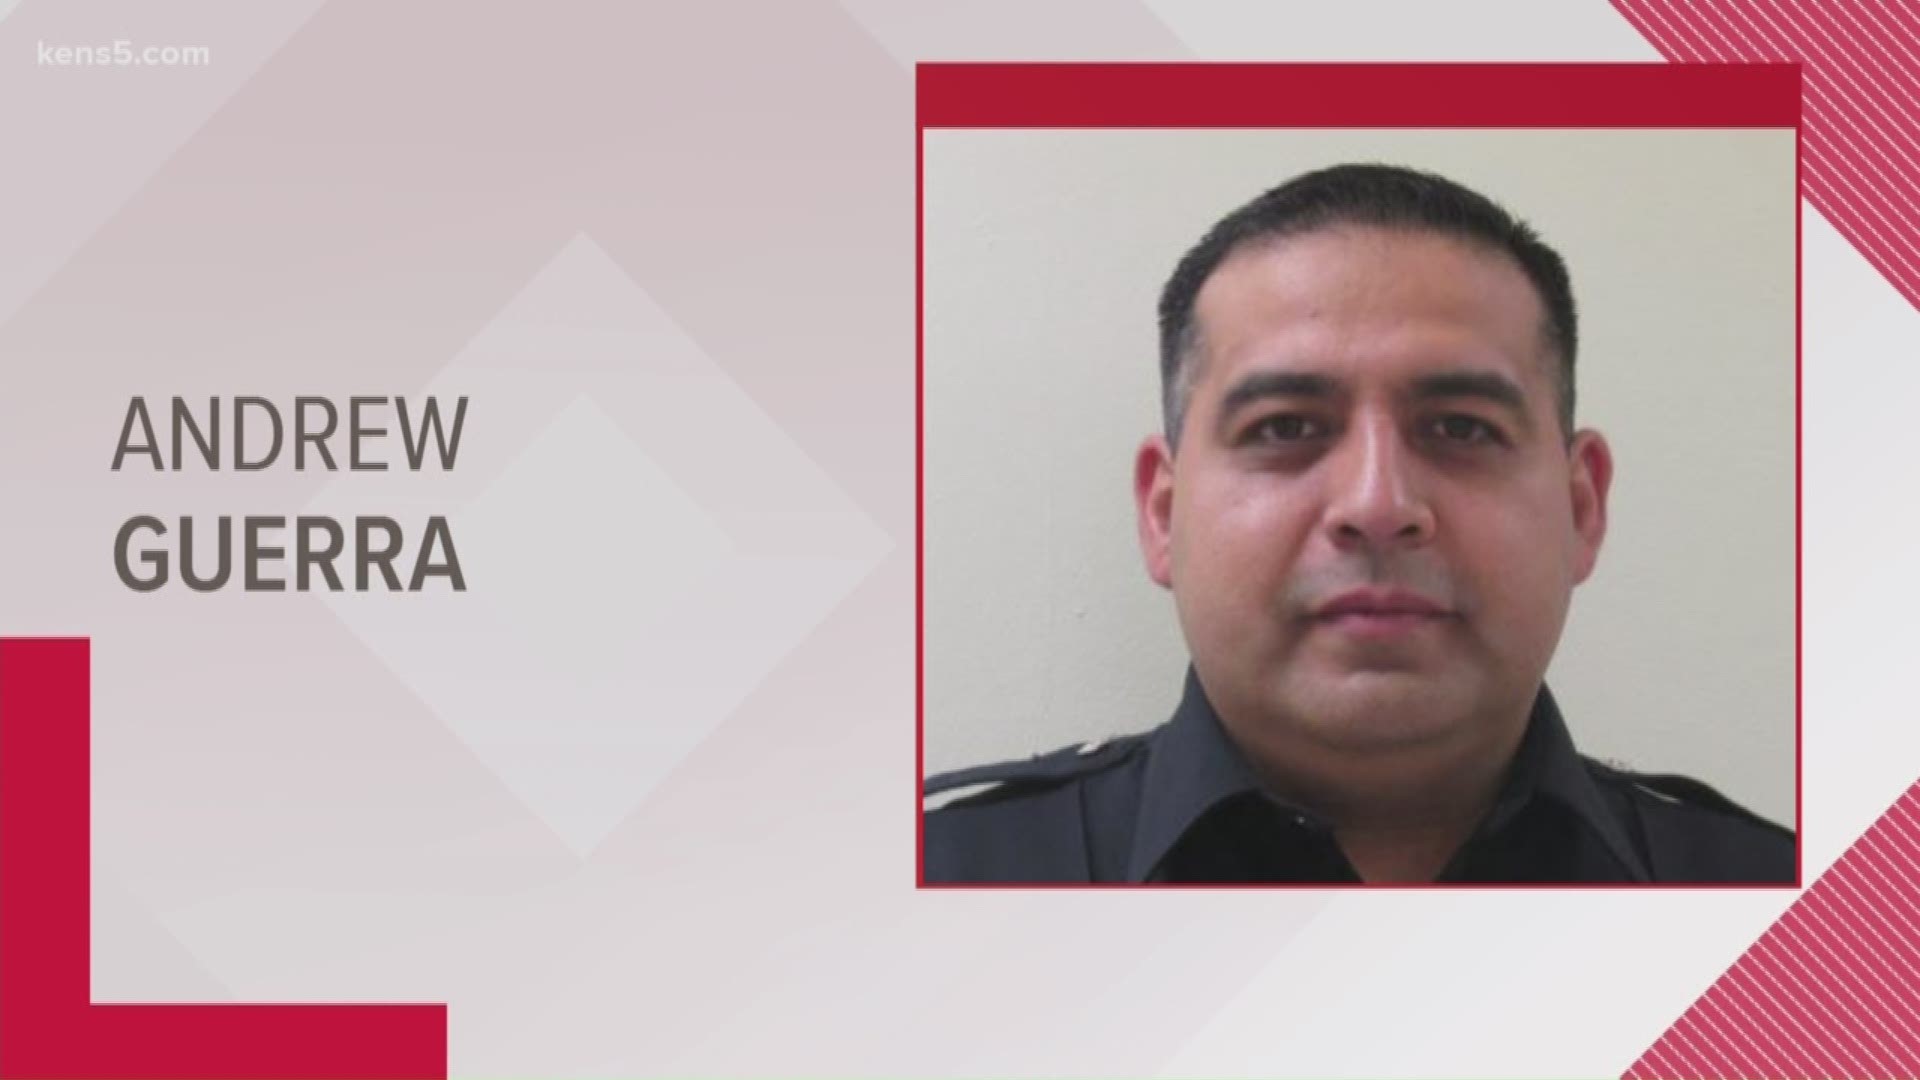 Deputy Andrew Sanchez Guerra was arrested Thursday afternoon.